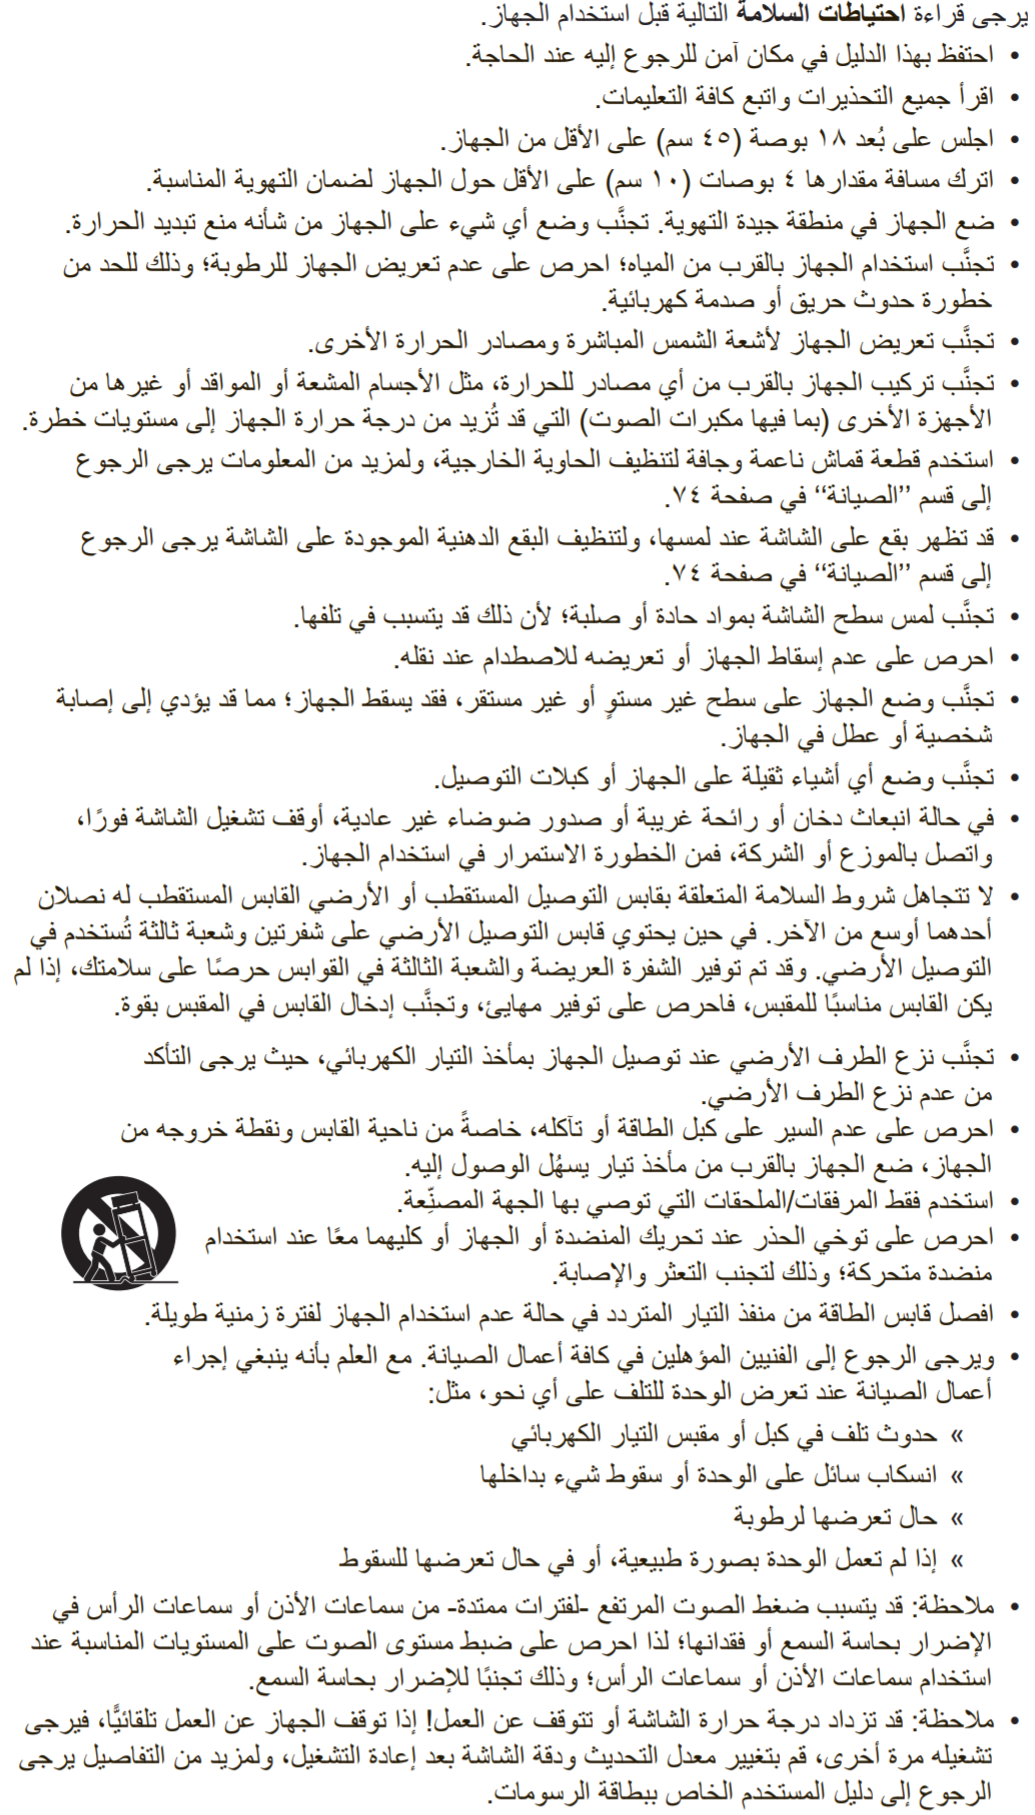 File:Safety Precautions Monitor Arabic.png